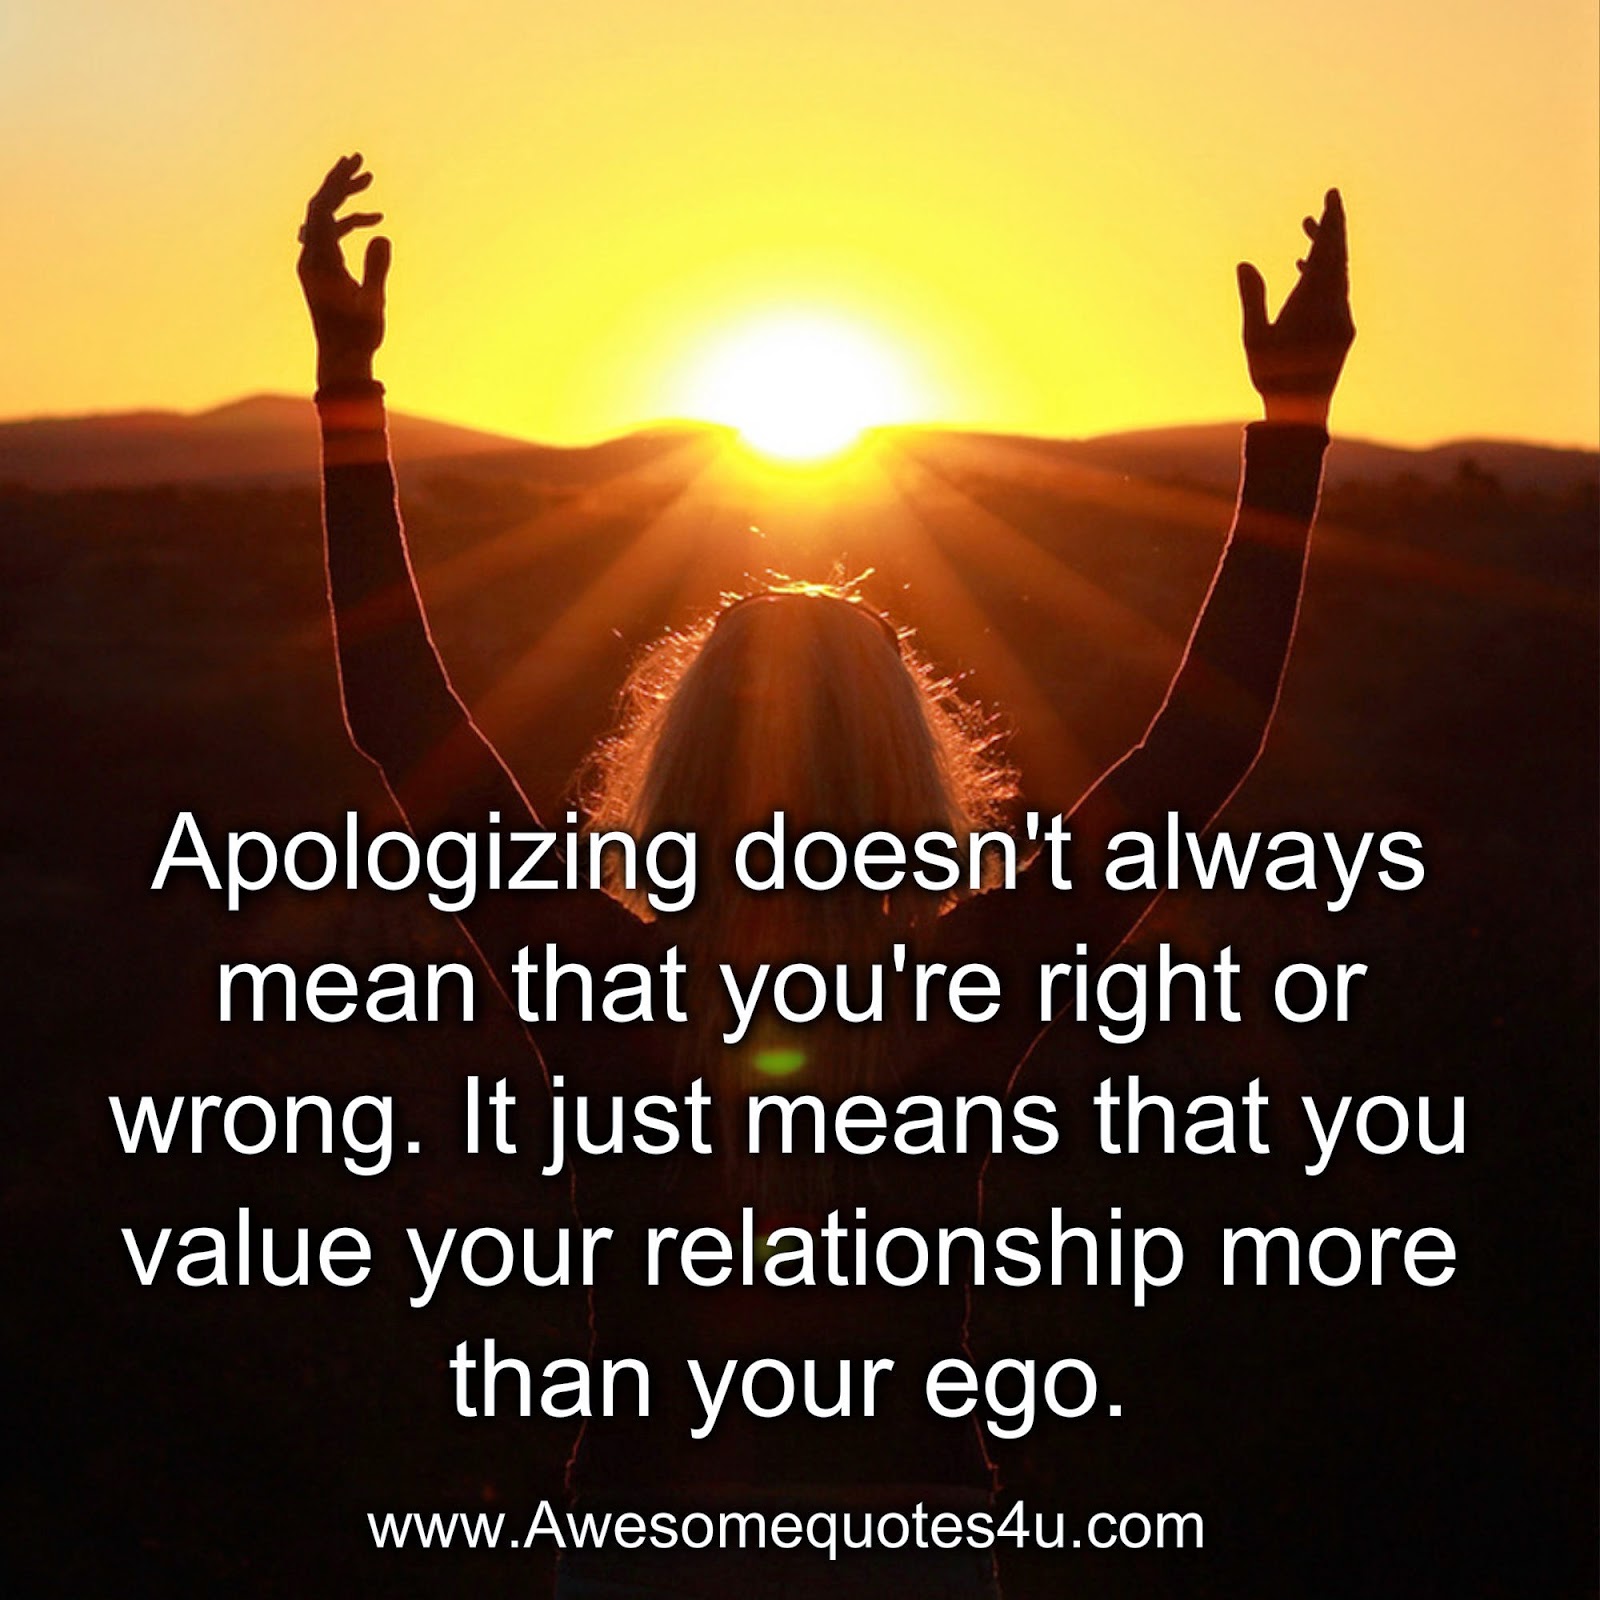 Apologizing. Always meaning. Apologies or apologize. Wrong to Love you. You should apologize